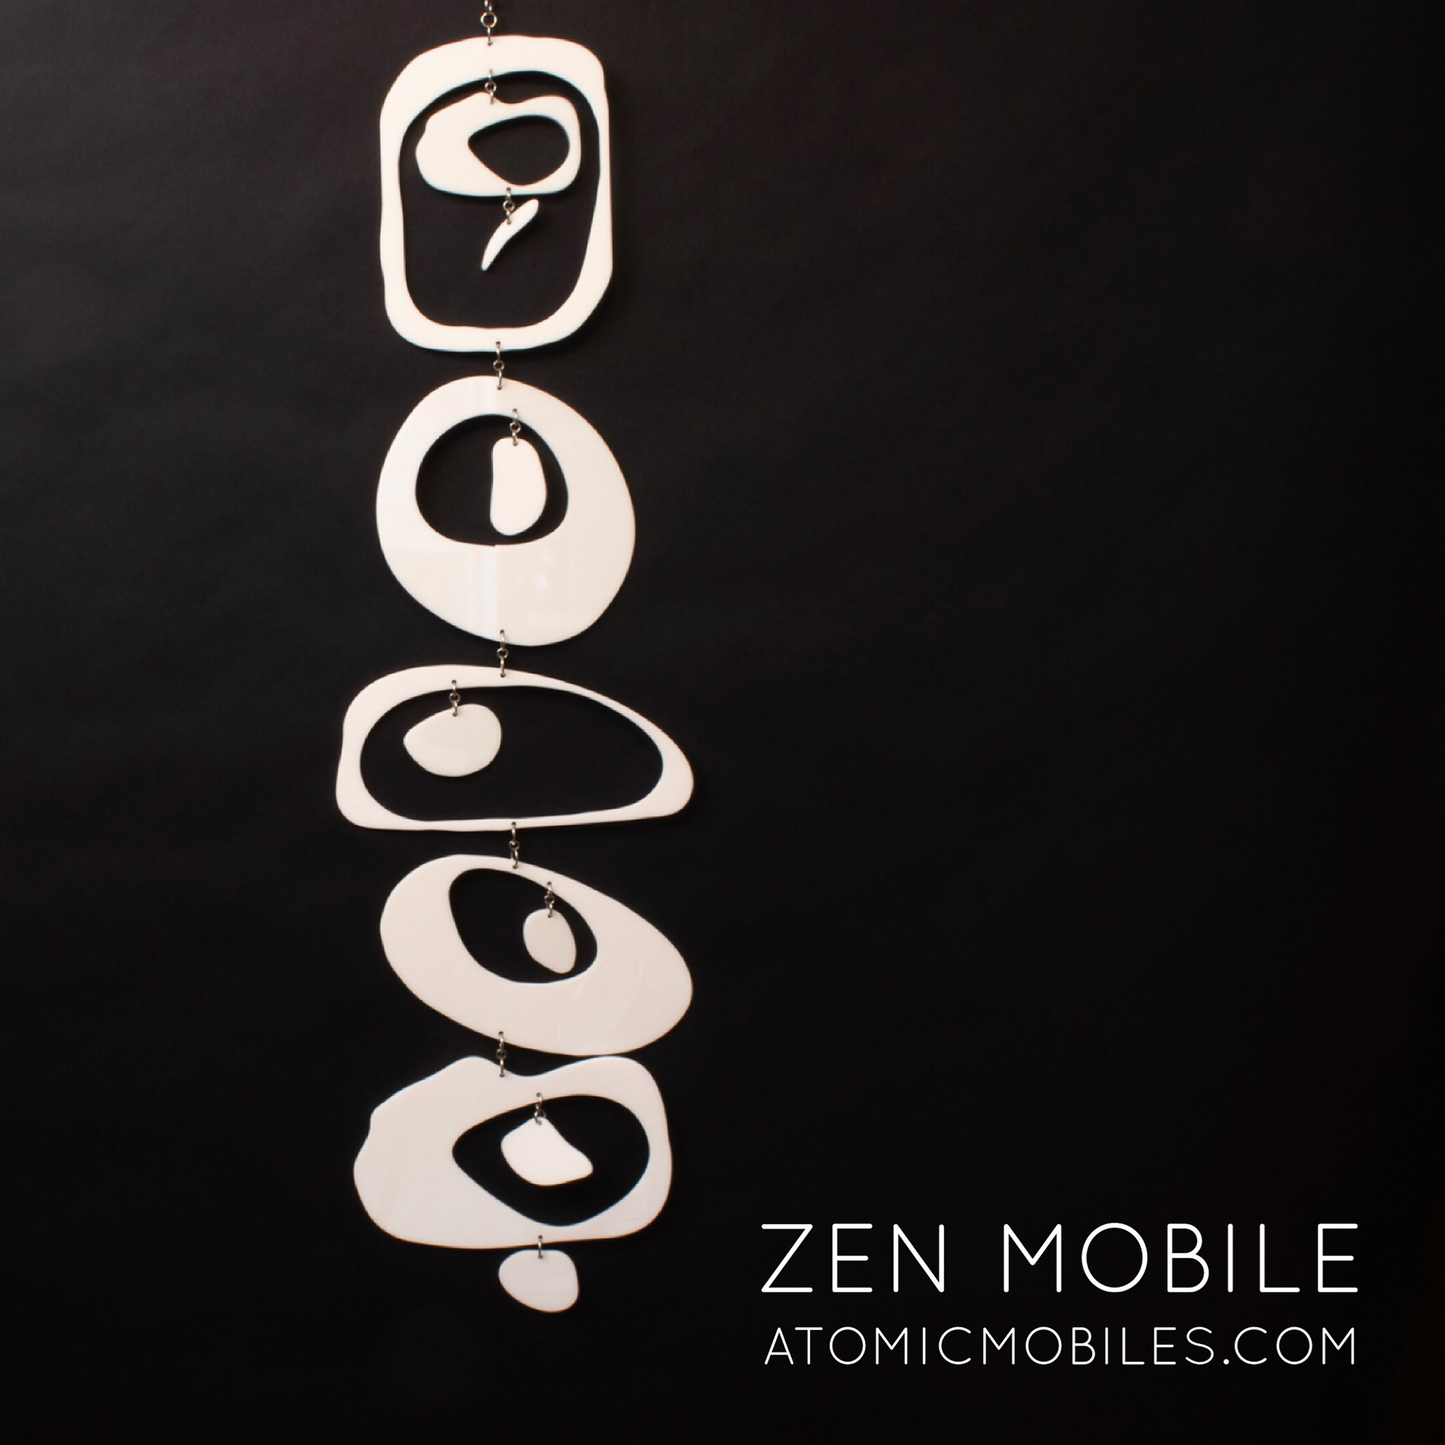 Zen Mobile in White by AtomicMobiles.com - calm kinetic sculpture inspired by rock balancing